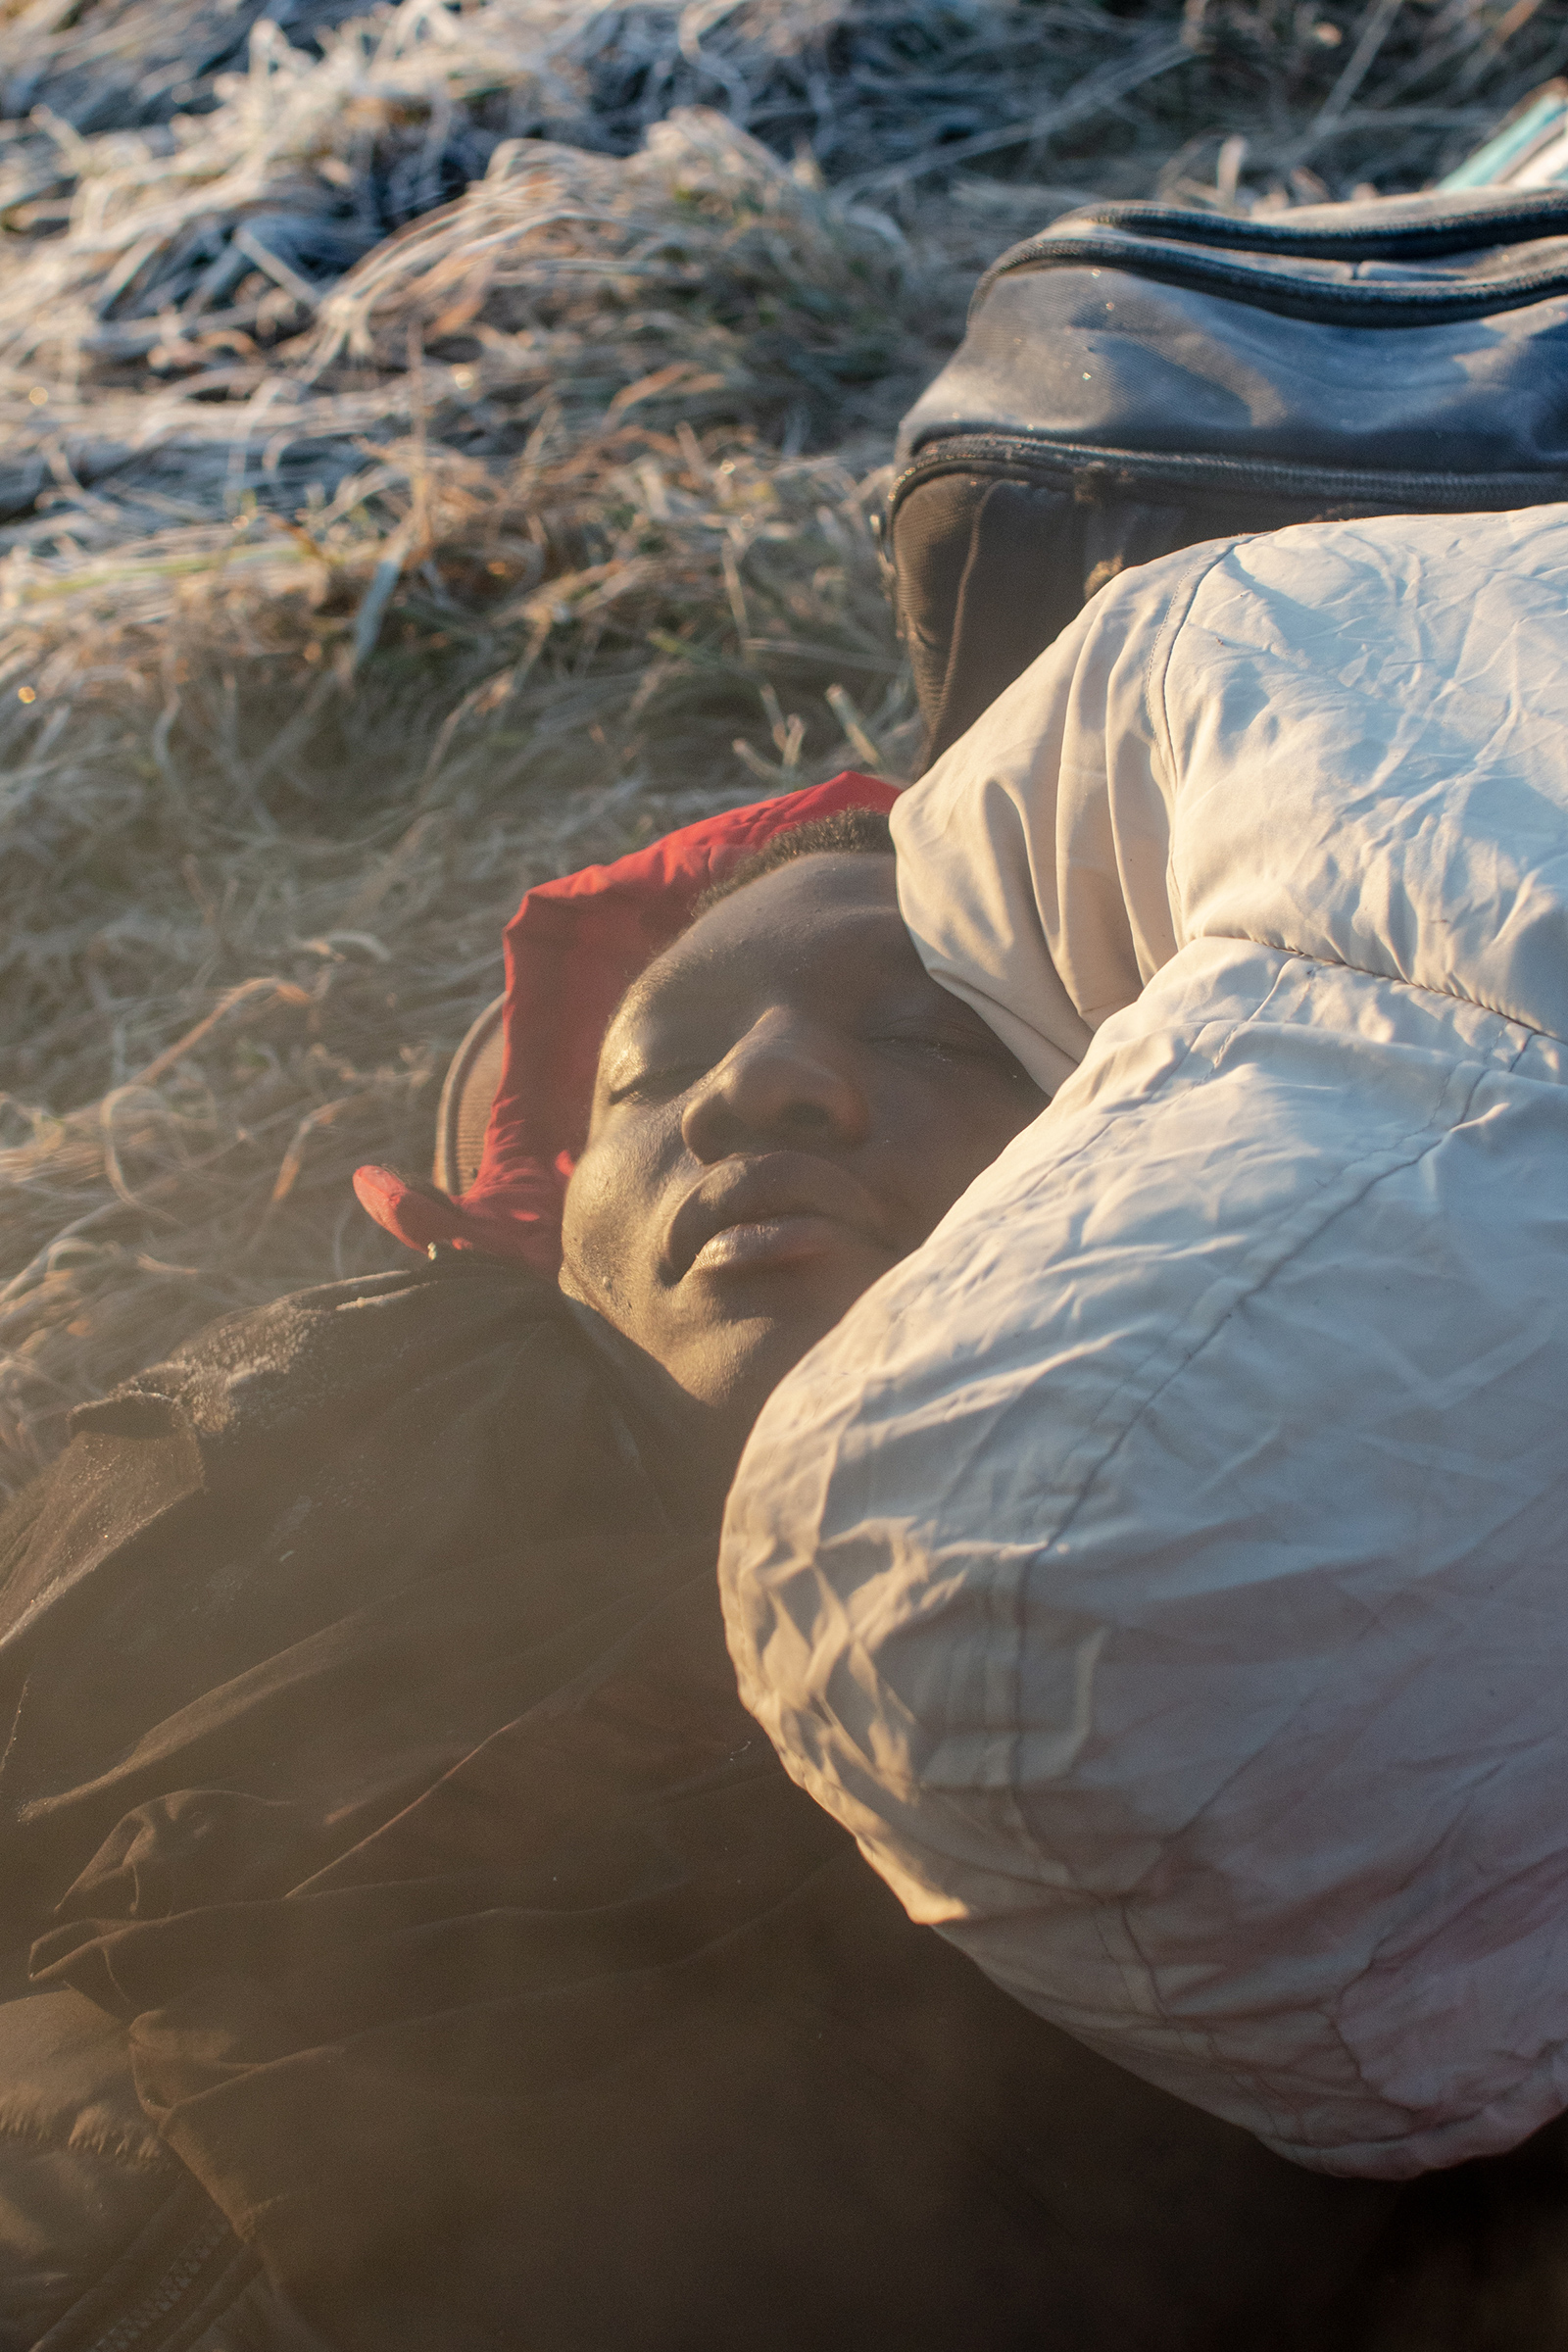 Refugees sleep on the cold ground on the morning of March 1 on the Polish side of the Medyka crossing (Natalie Keyssar for TIME)